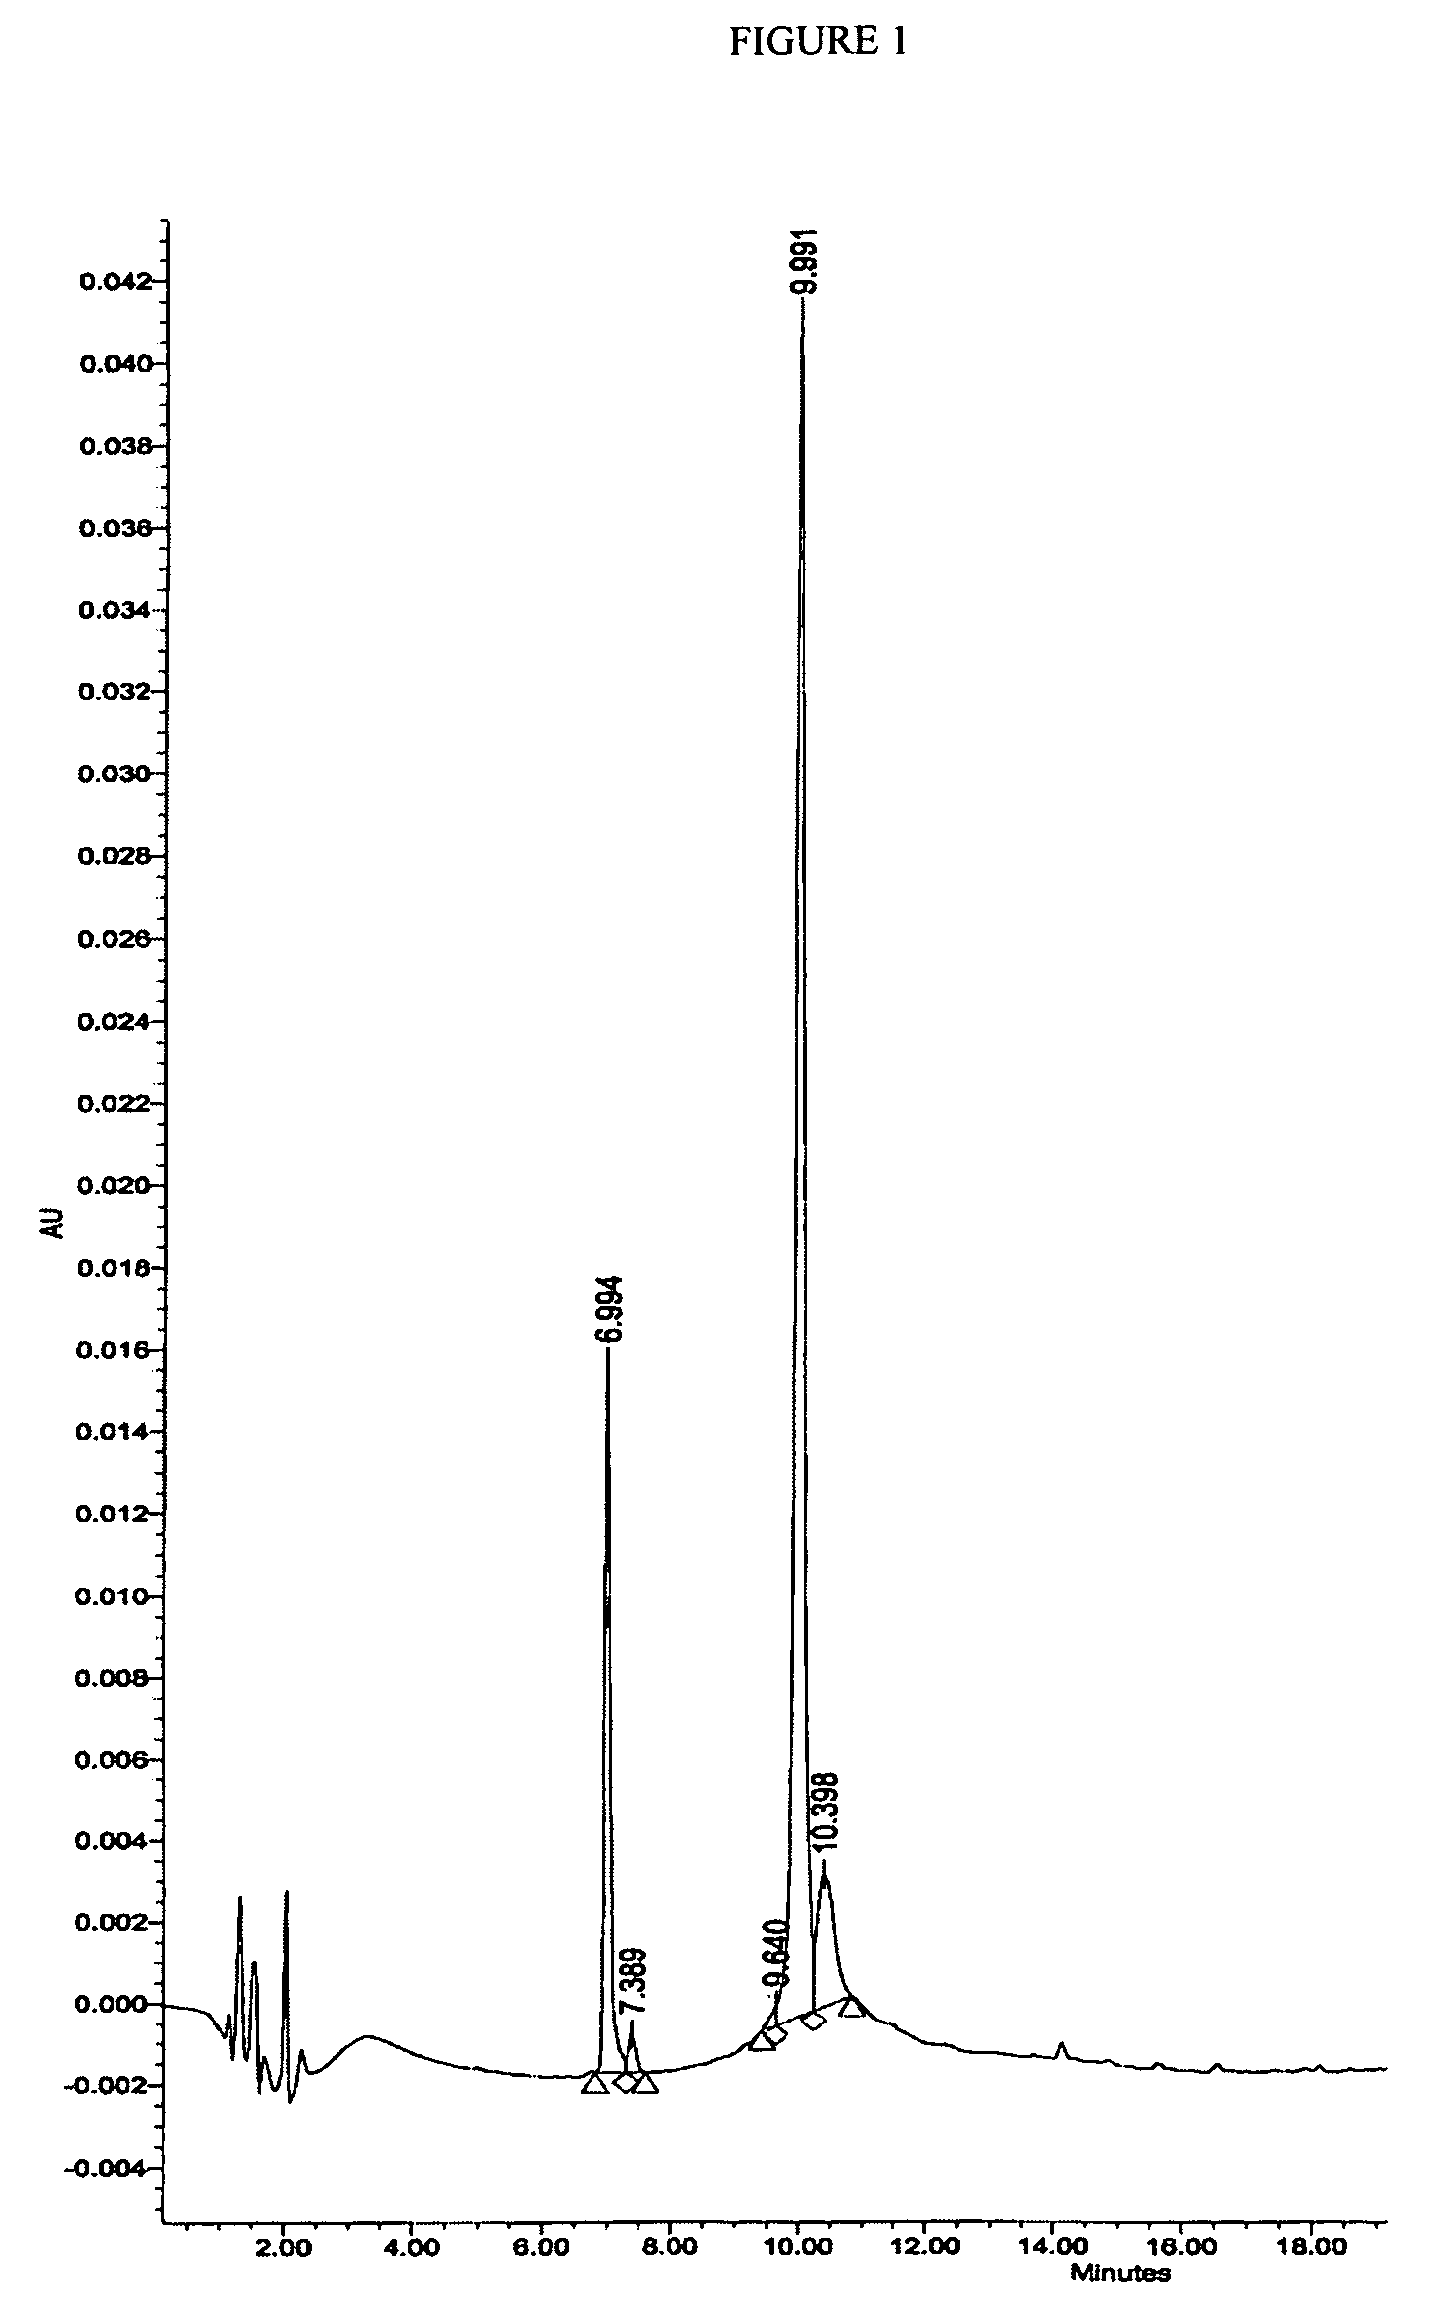 Neuropeptide-2 receptor (Y-2R) agonists and uses thereof